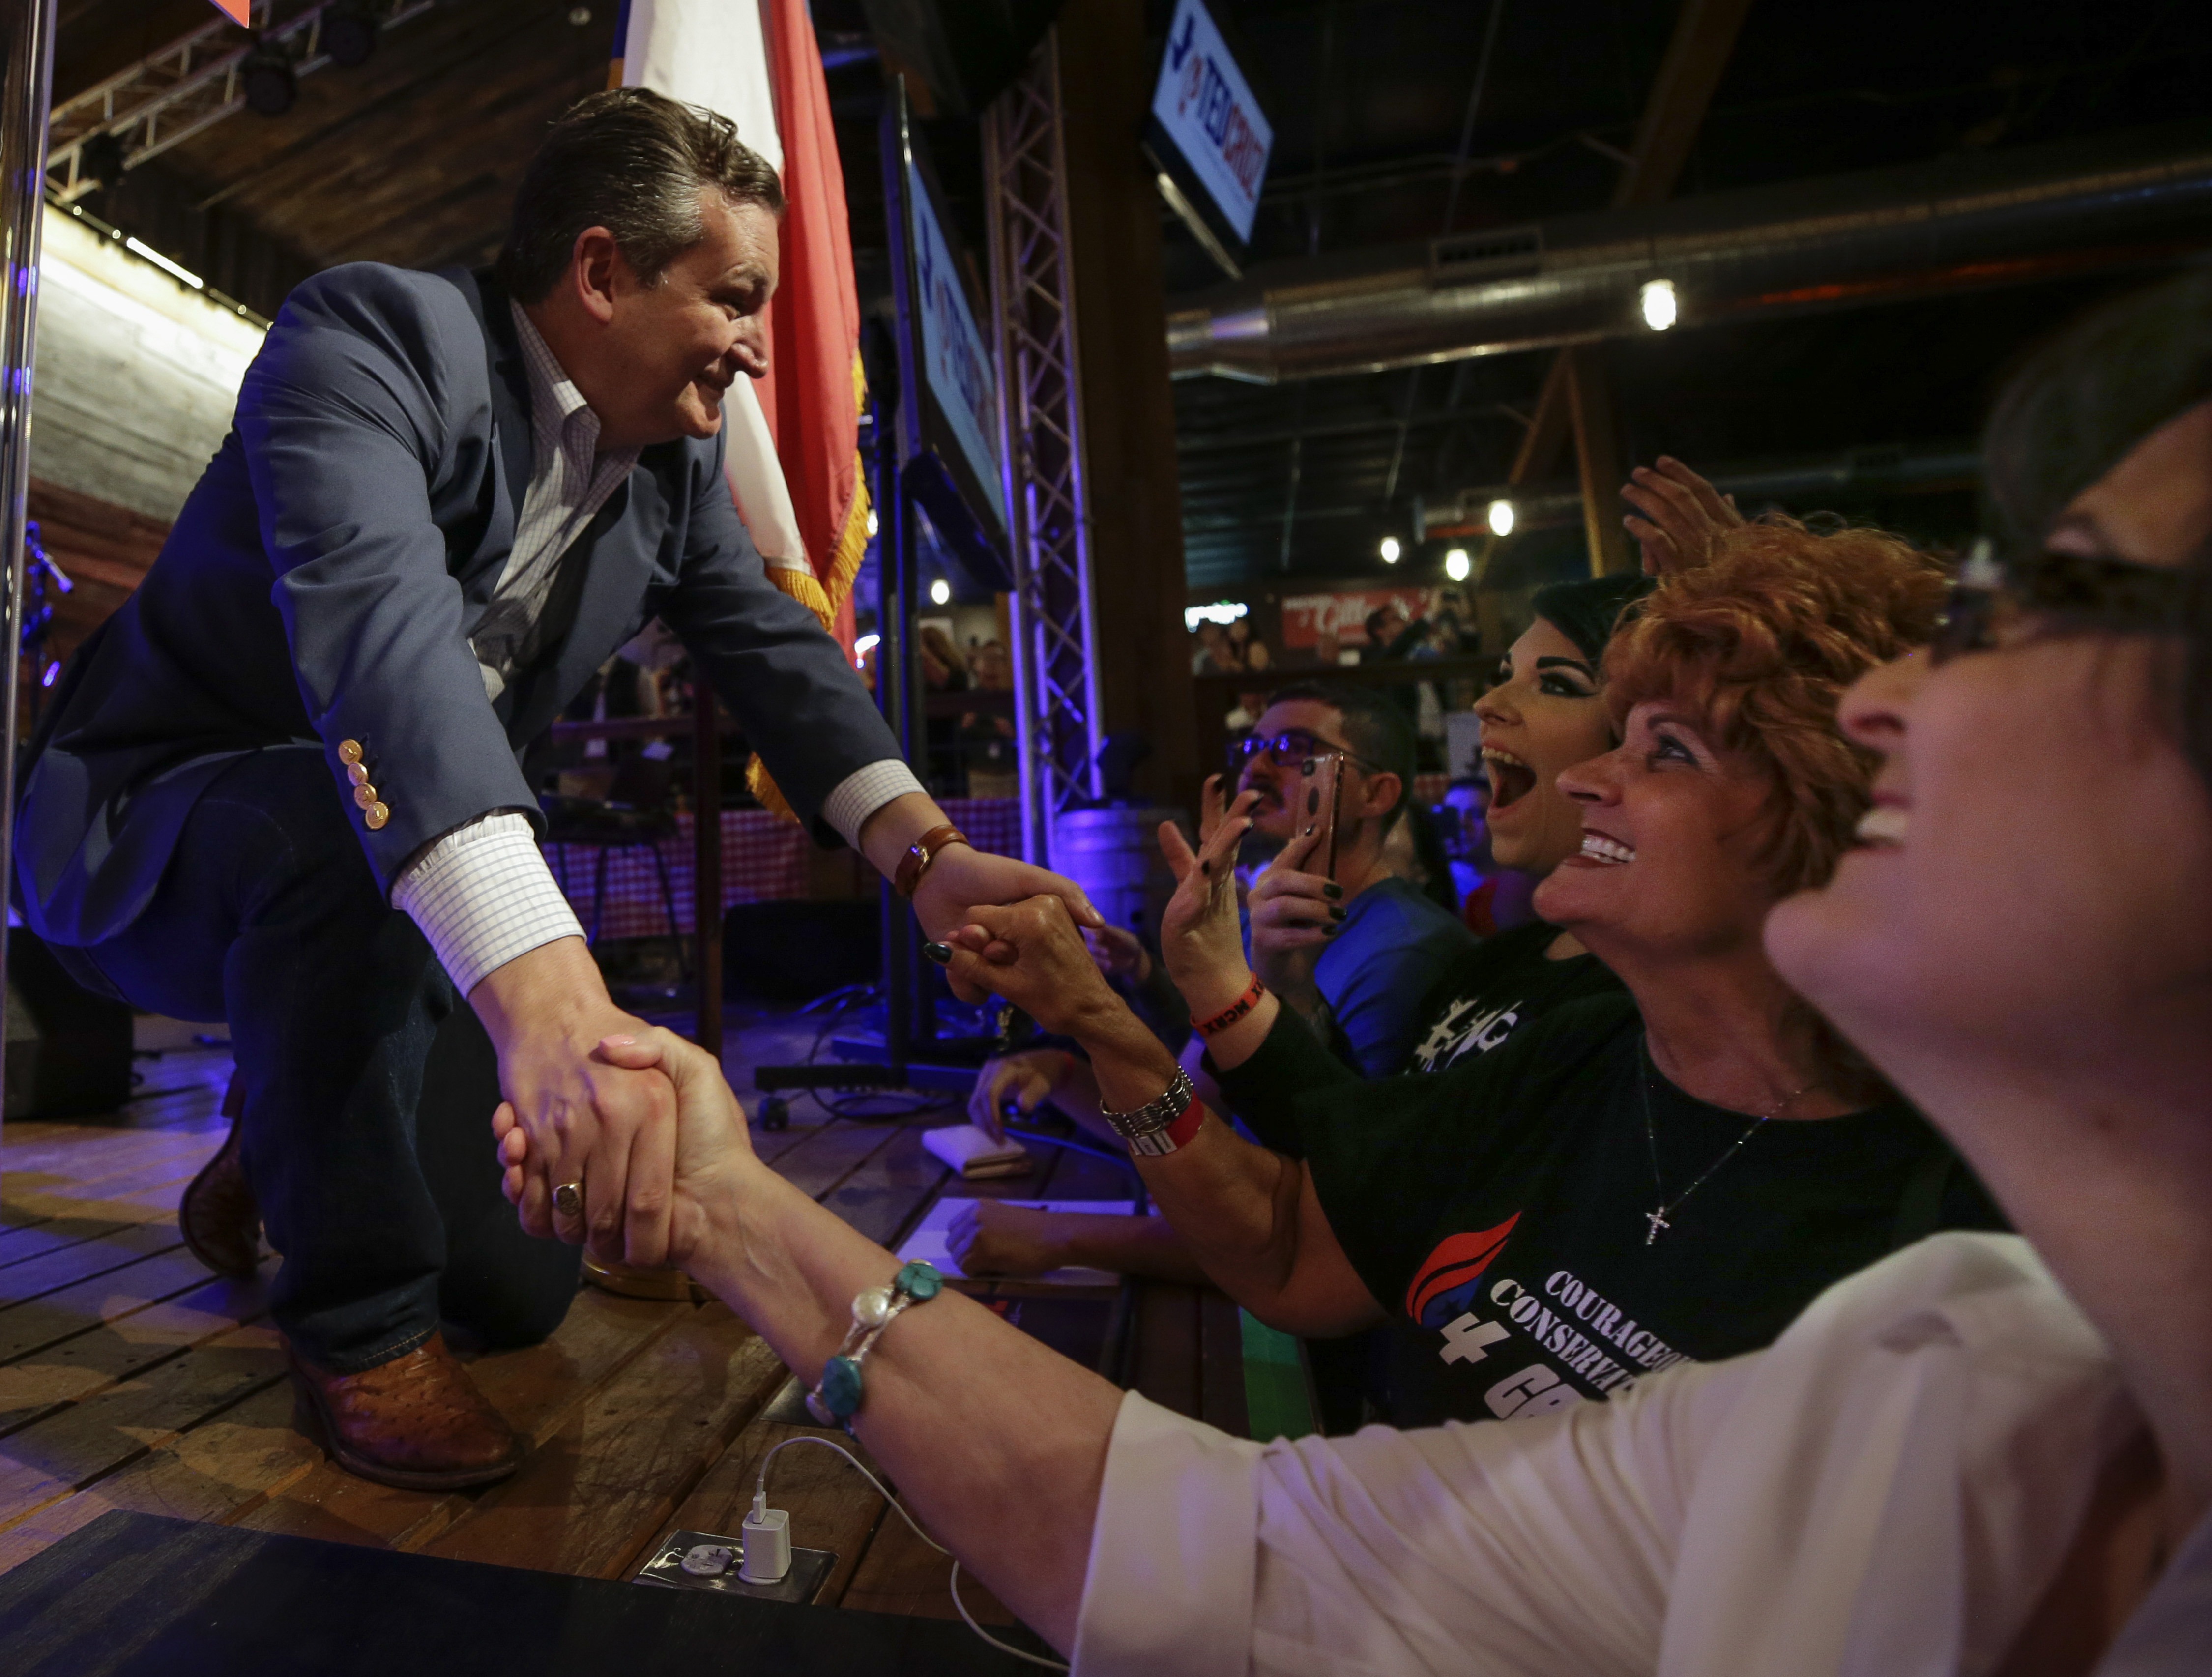 Sen. Ted Cruz (R-TX) shakes hands with supporters during a rally to launch his re-election campaign at the Redneck Country Club on April 2, 2018 in Stafford, Texas. (Erich Schlegel/Getty Images)